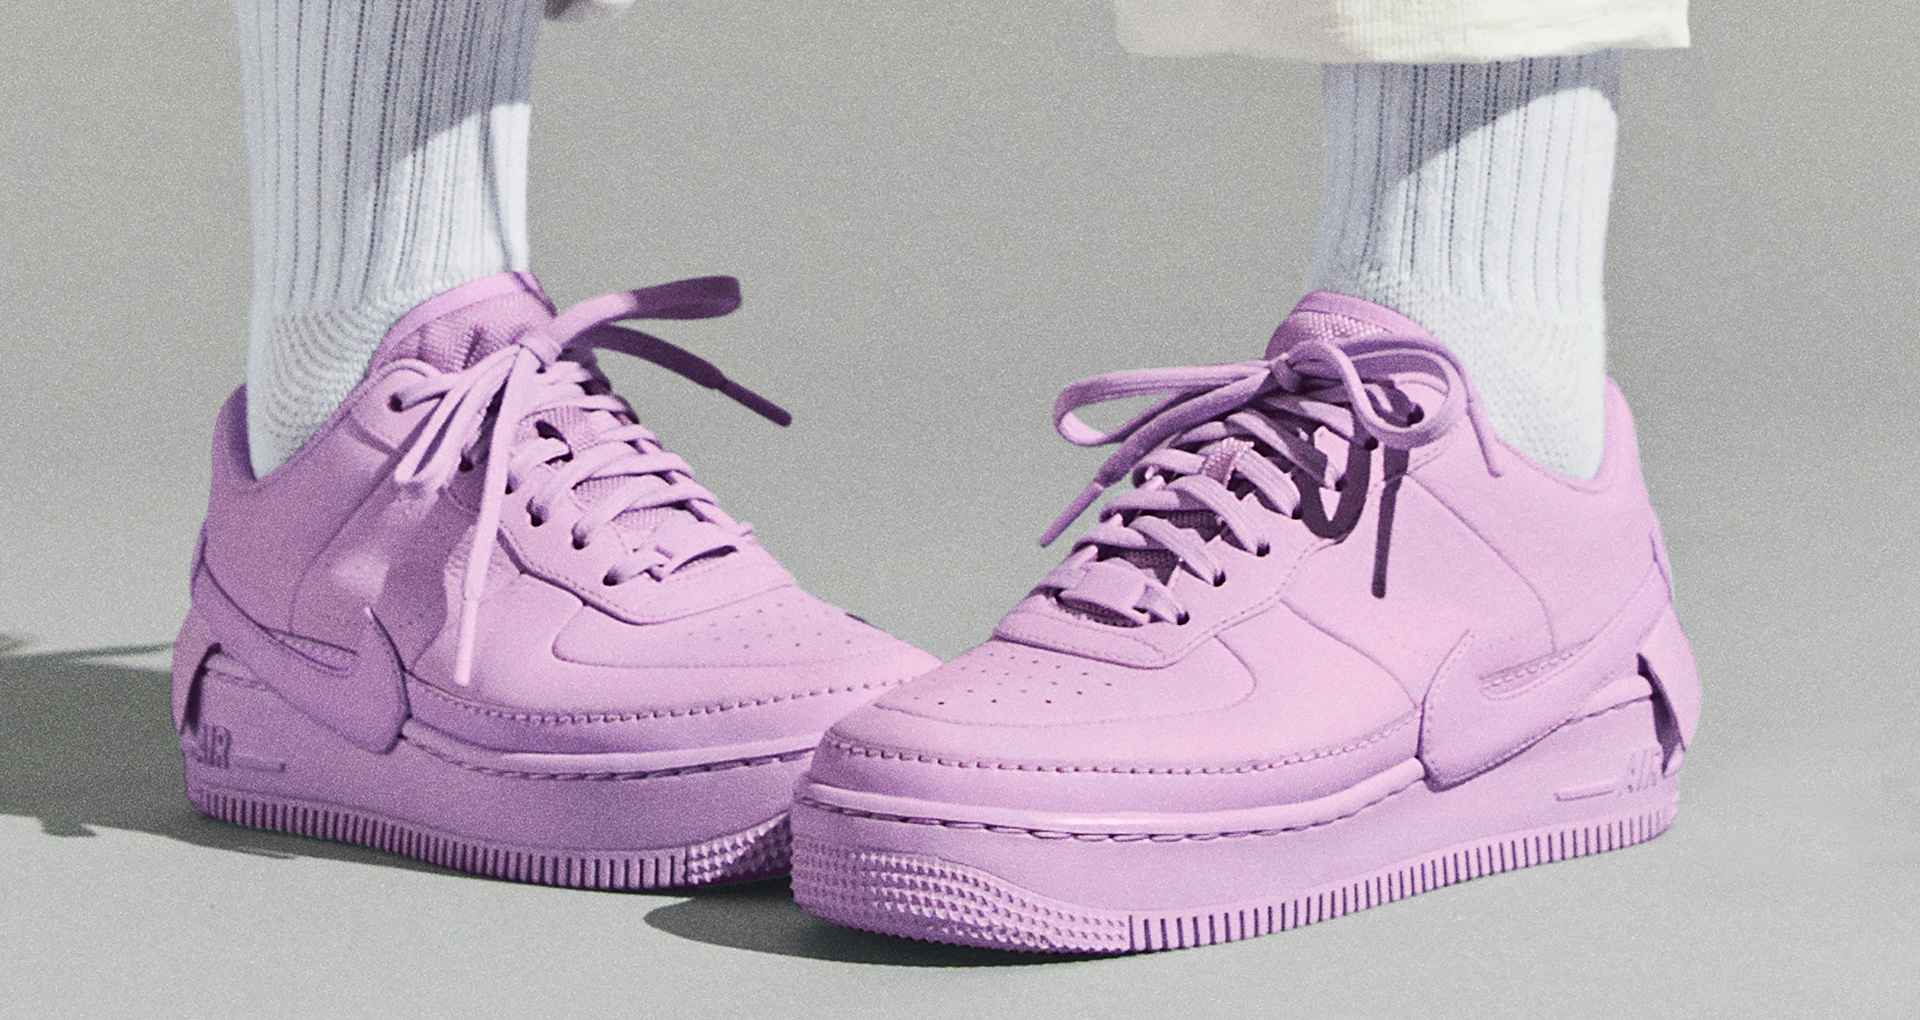 Nike Air Force 1 Jester XX Lavender Release Date AO1220 500